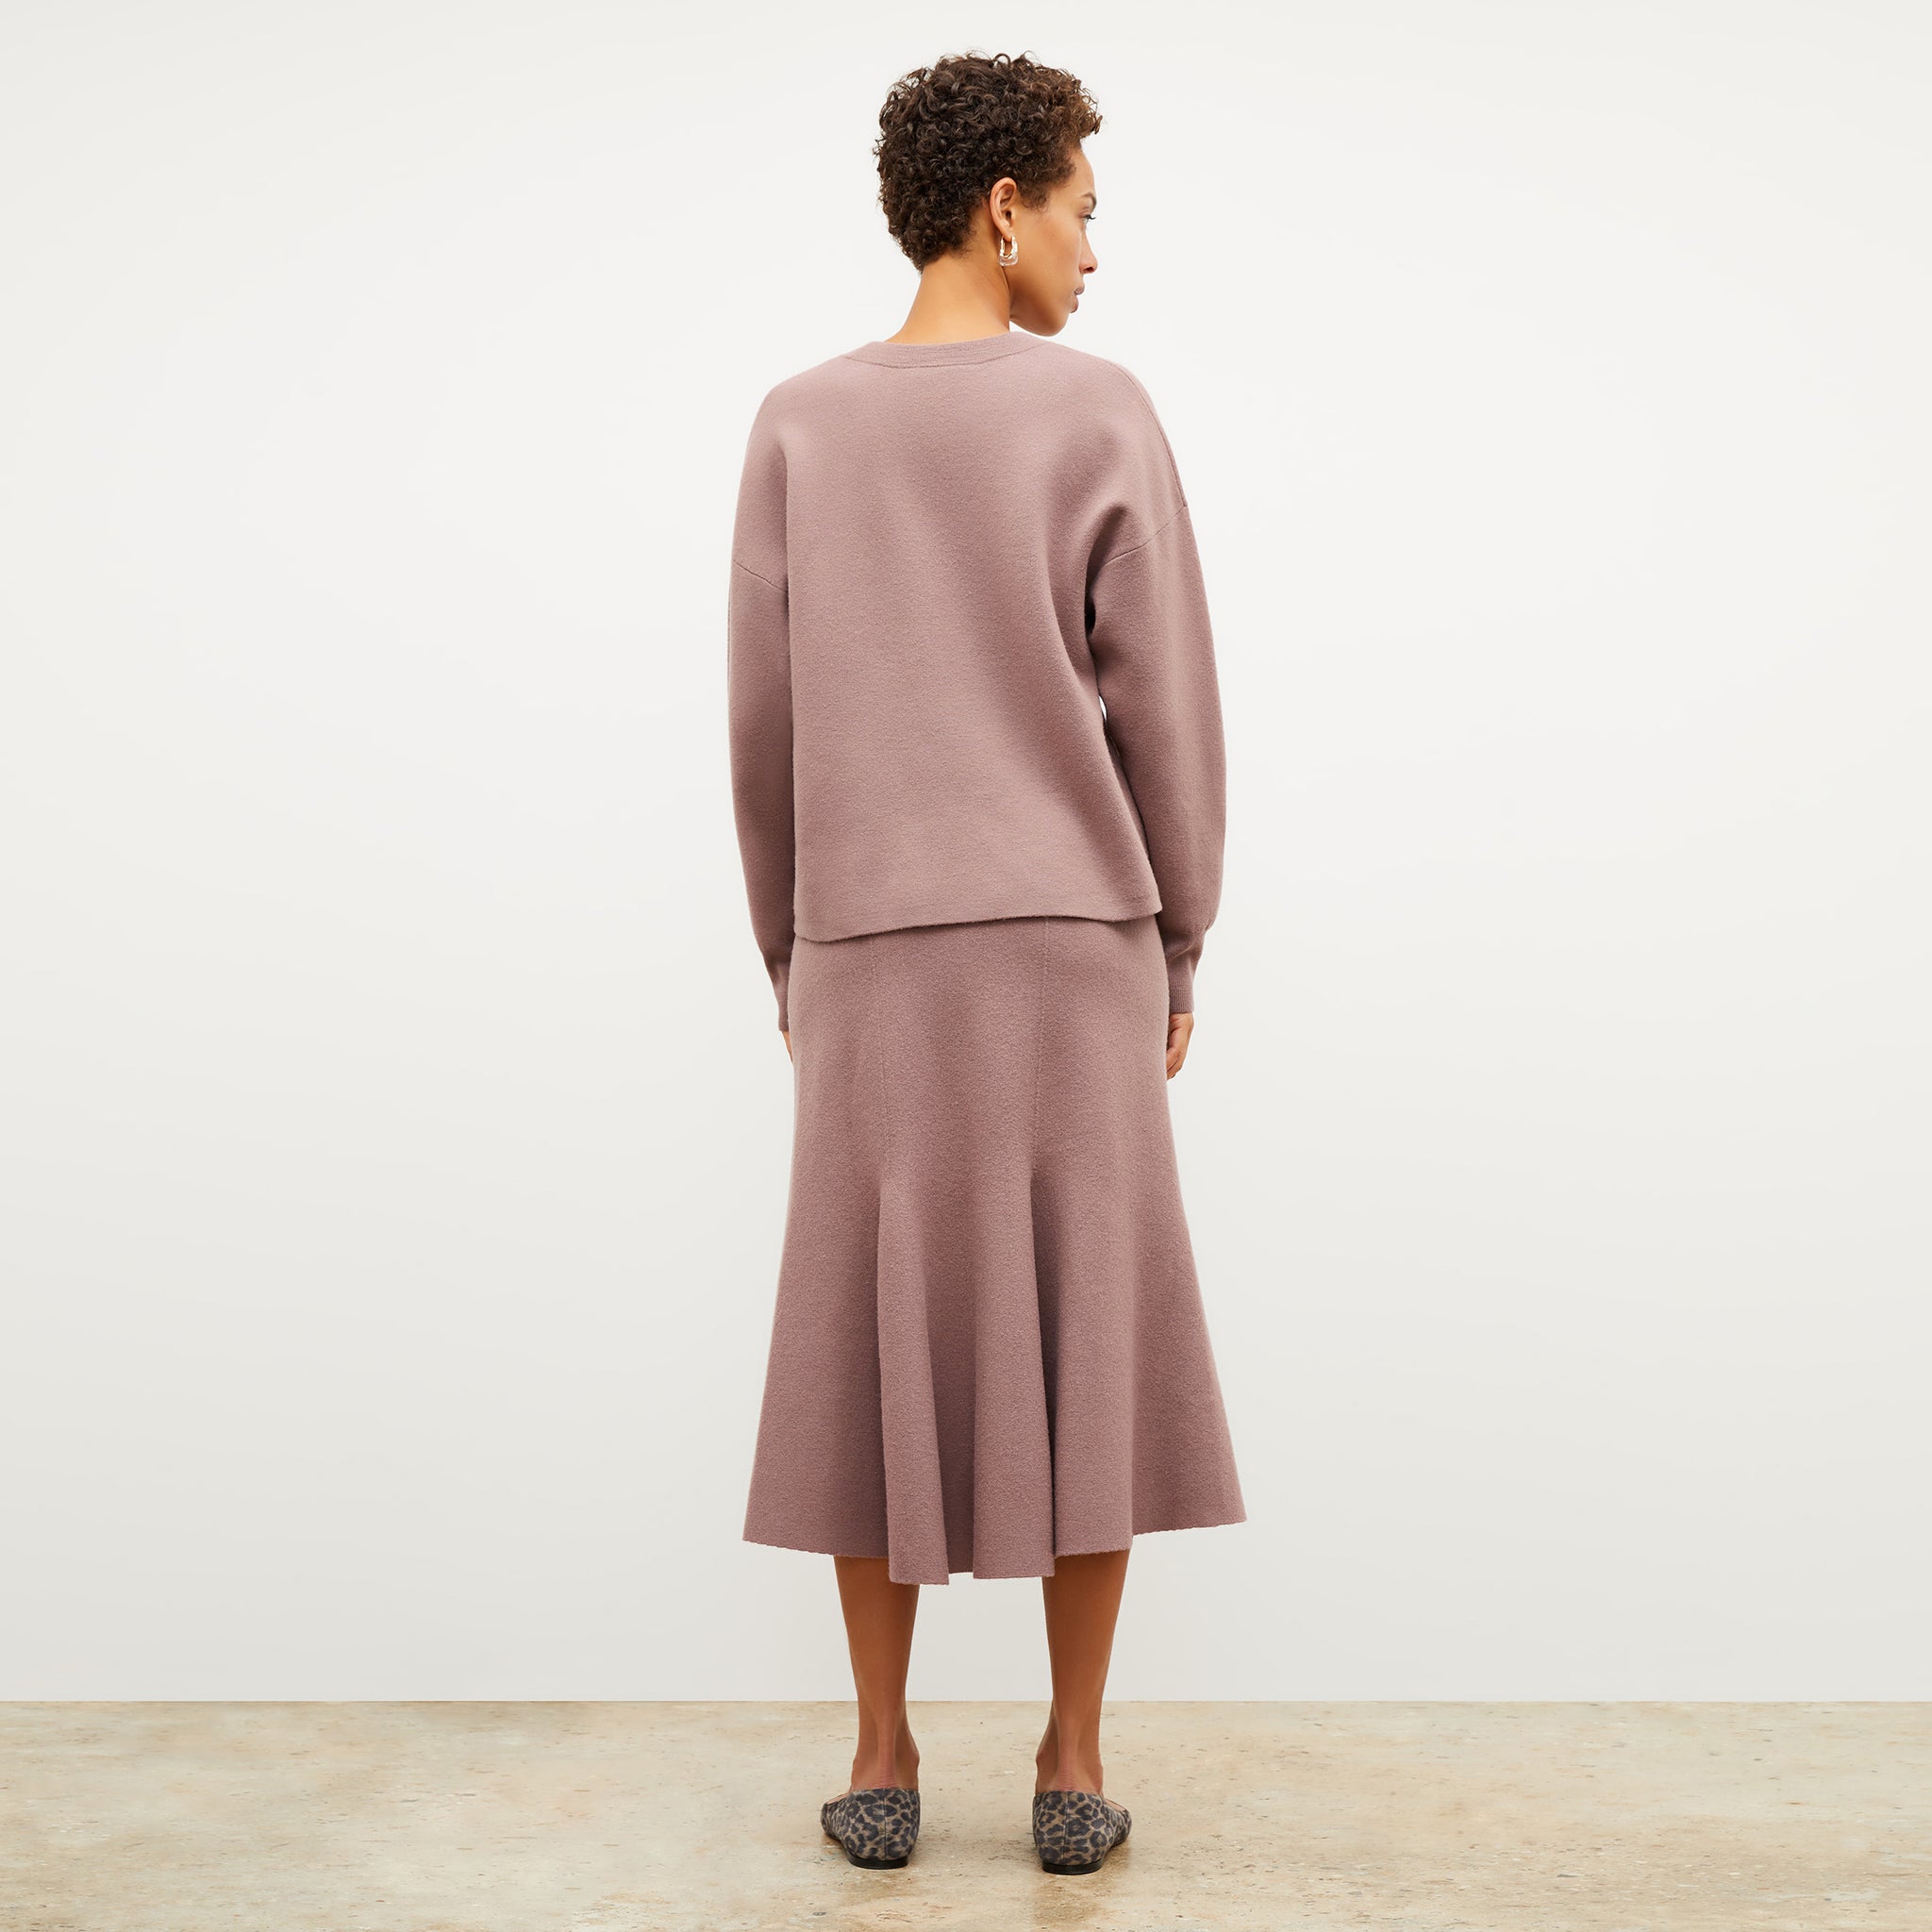 Back image of a woman wearing the quincy sweater in rose taupe